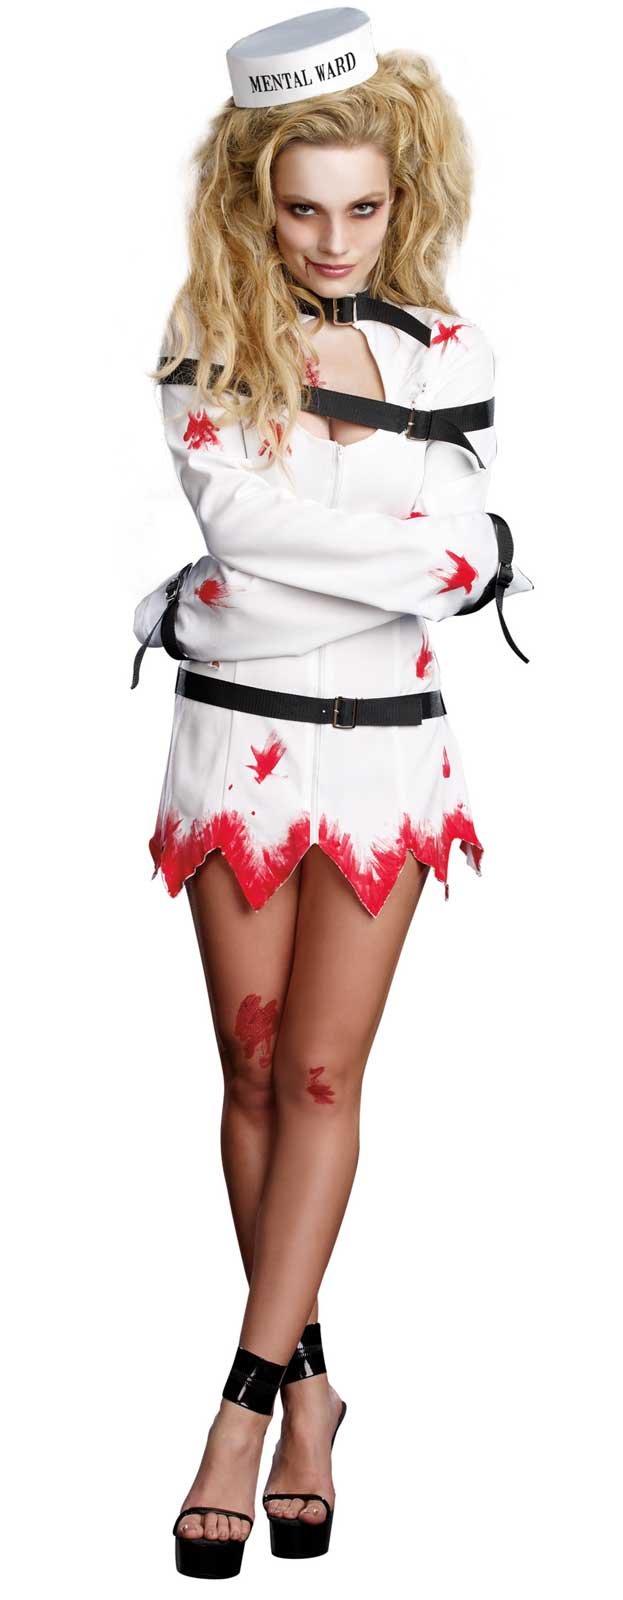 Awesome crazy sexy style Adult Costume - Click Image to Close